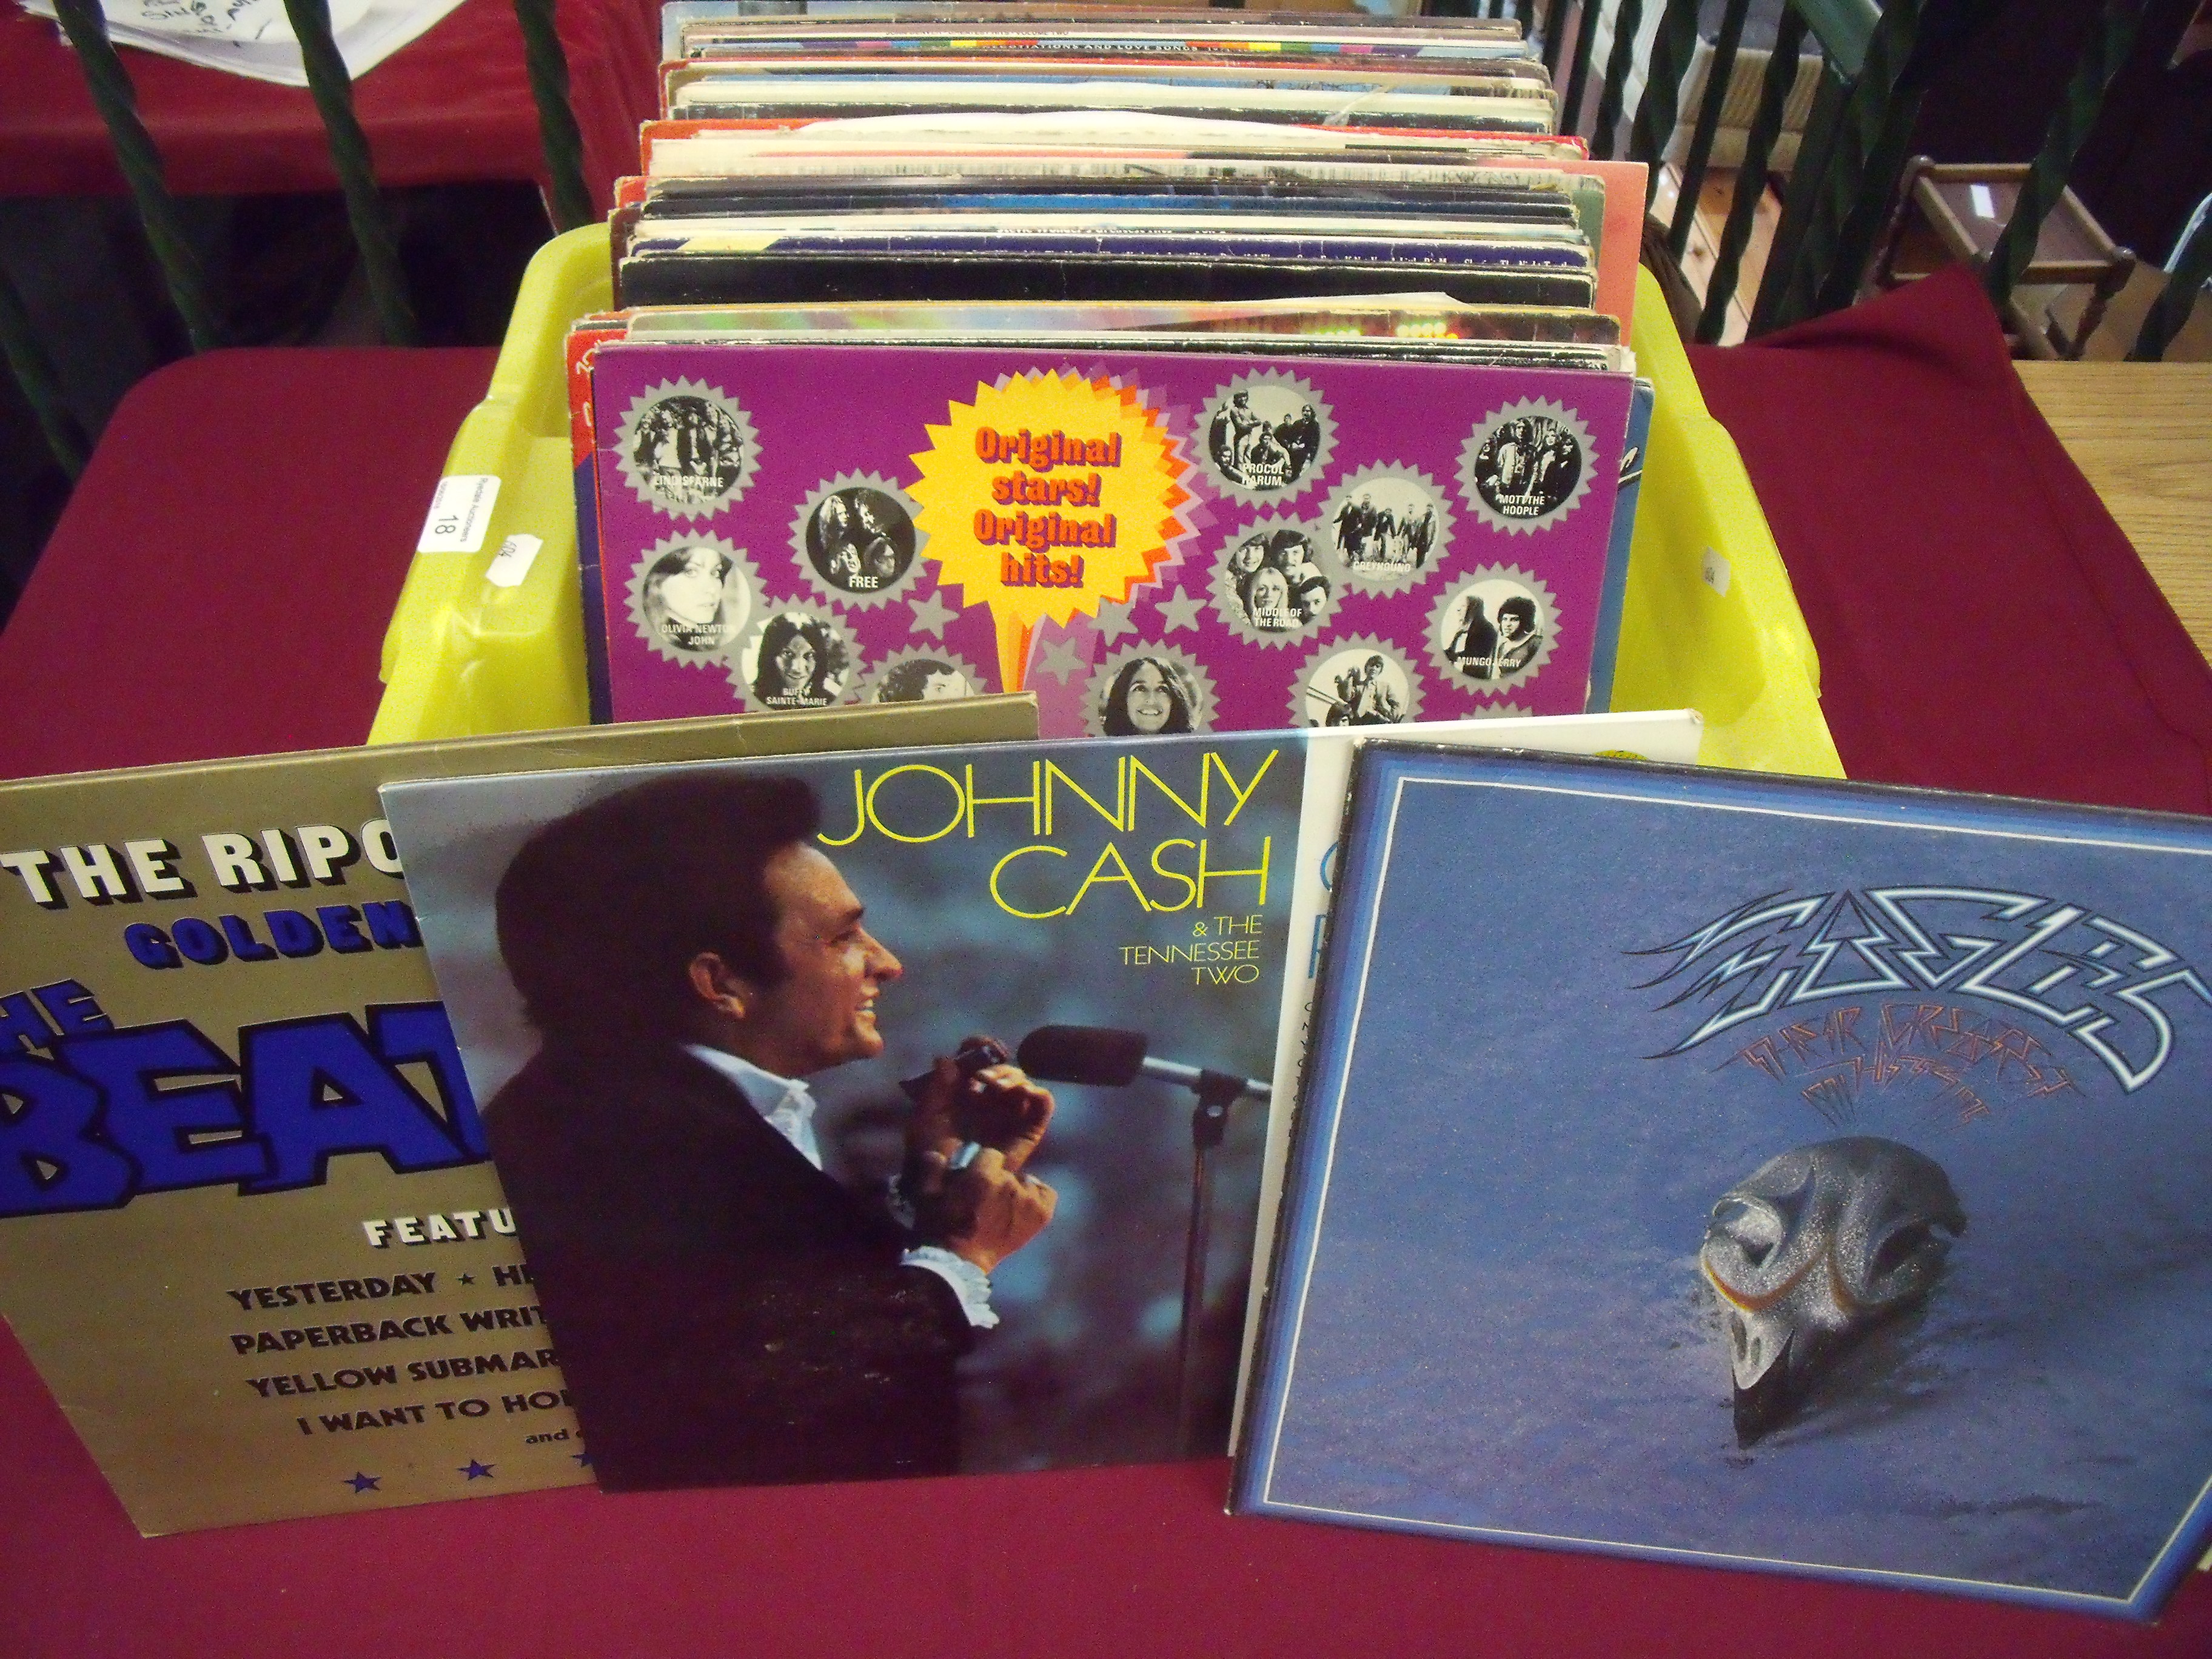 A box containing a large collection of LP records including 'Johnny Cash', 'Rod Stewart', 'Eagles',